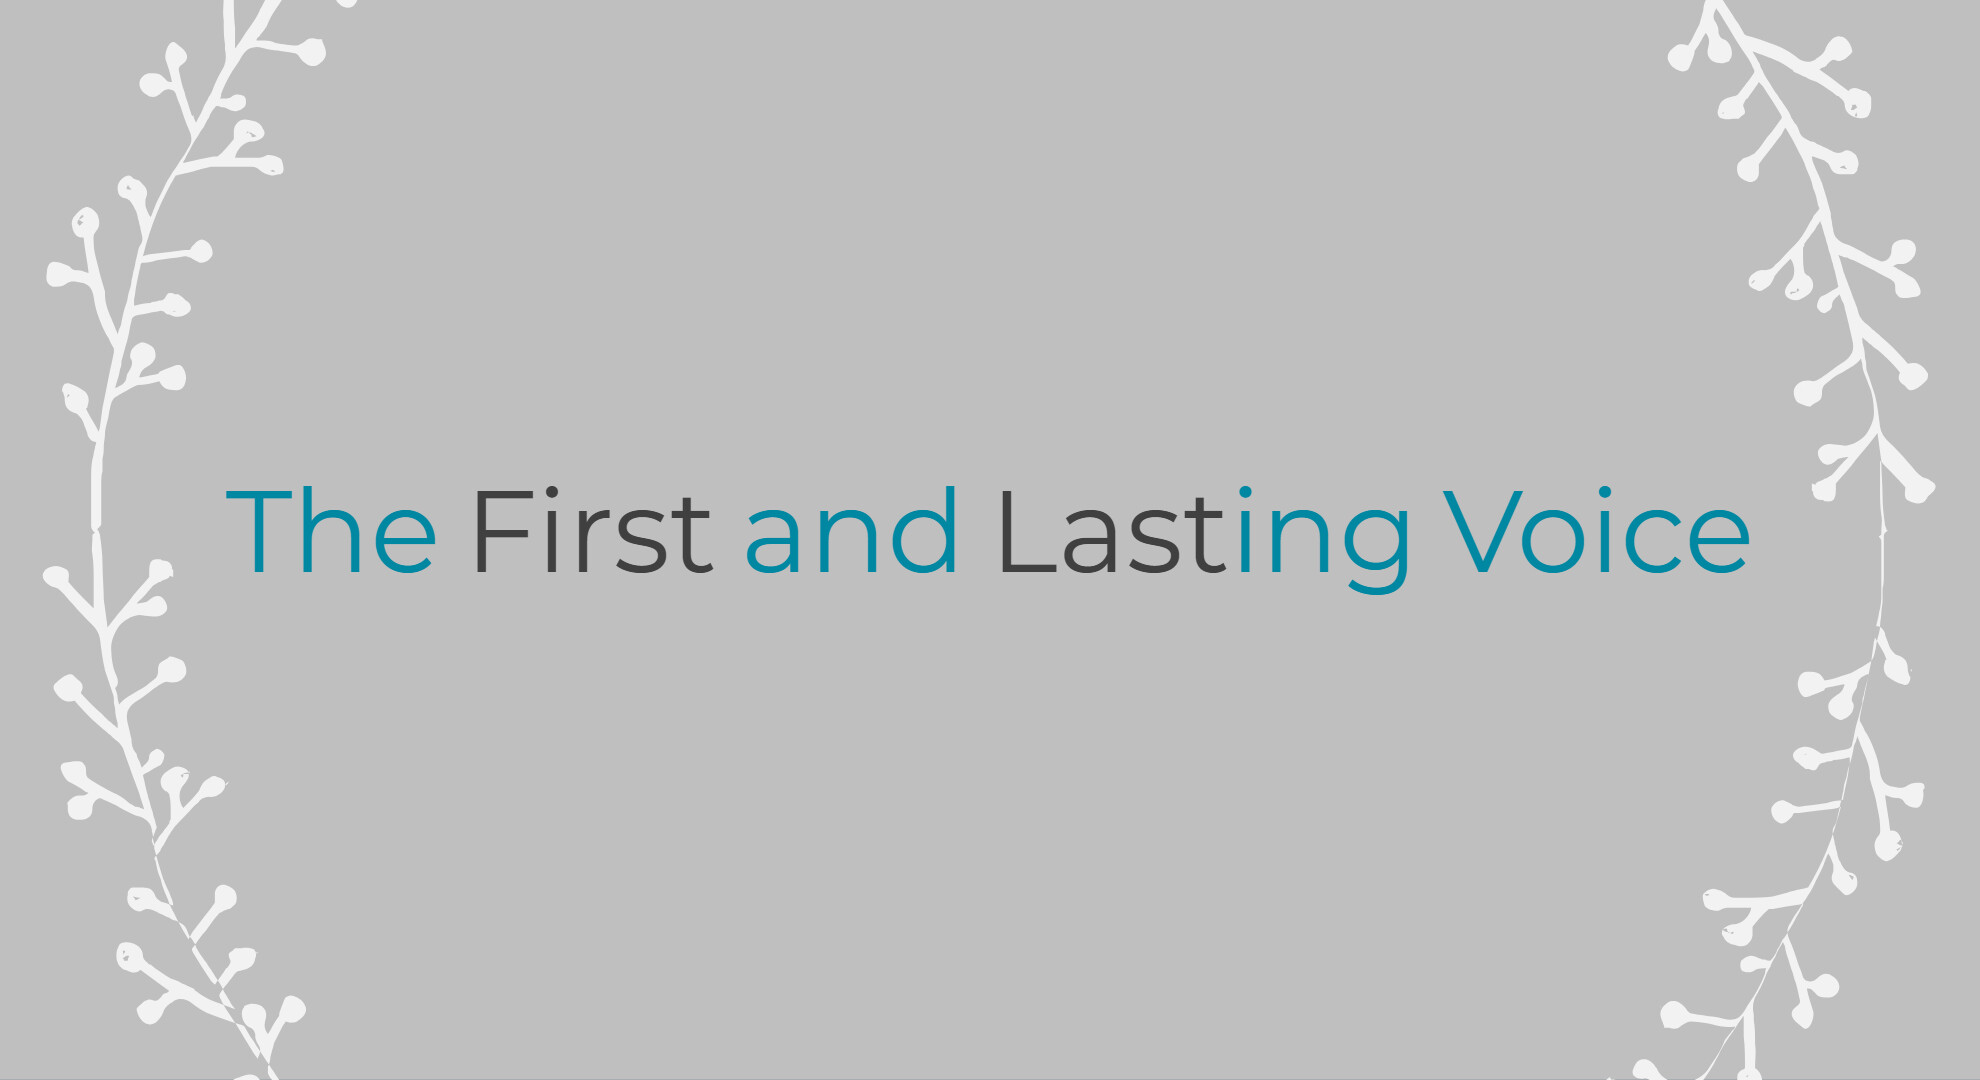 The First and Lasting Voice